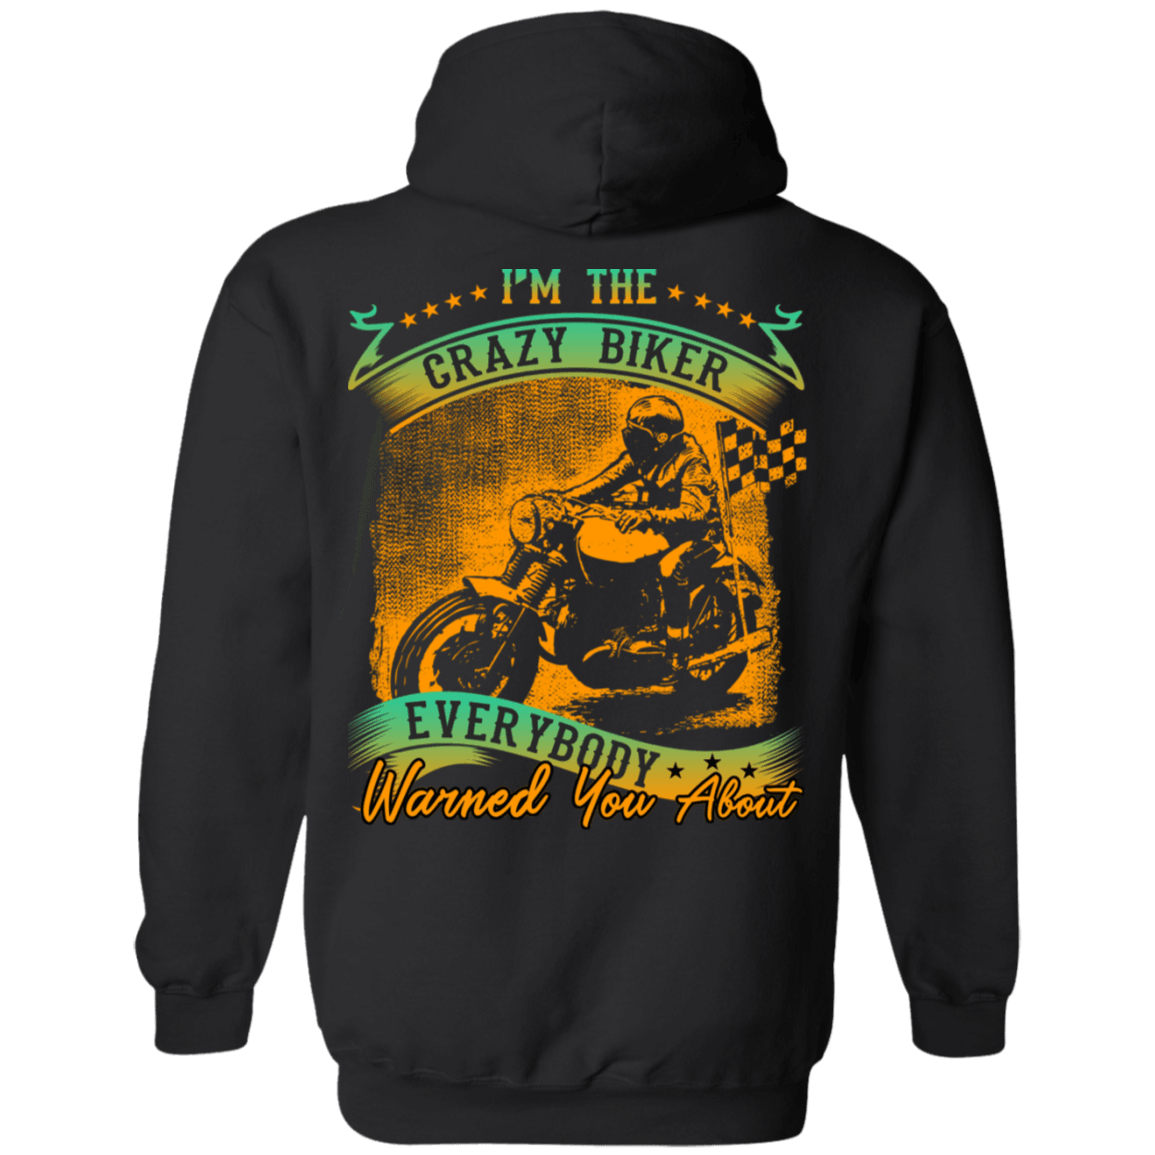 Everybody Warned You About Hoodie - American Legend Rider